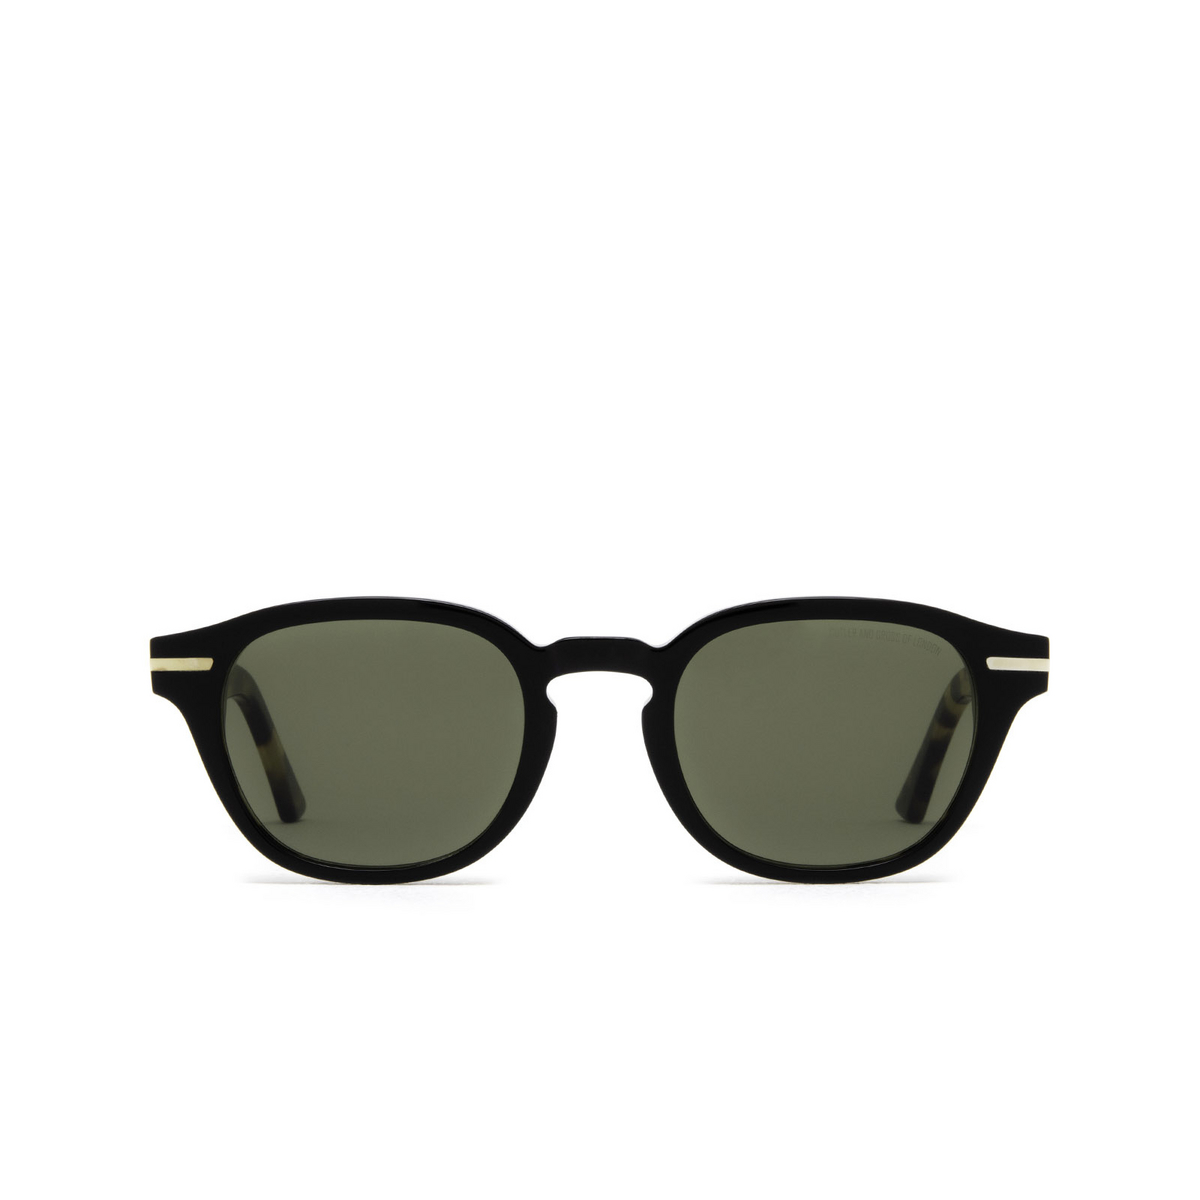 Cutler and Gross® Square Sunglasses: 1356 SUN color Black Taxi On Camo 06 - front view.